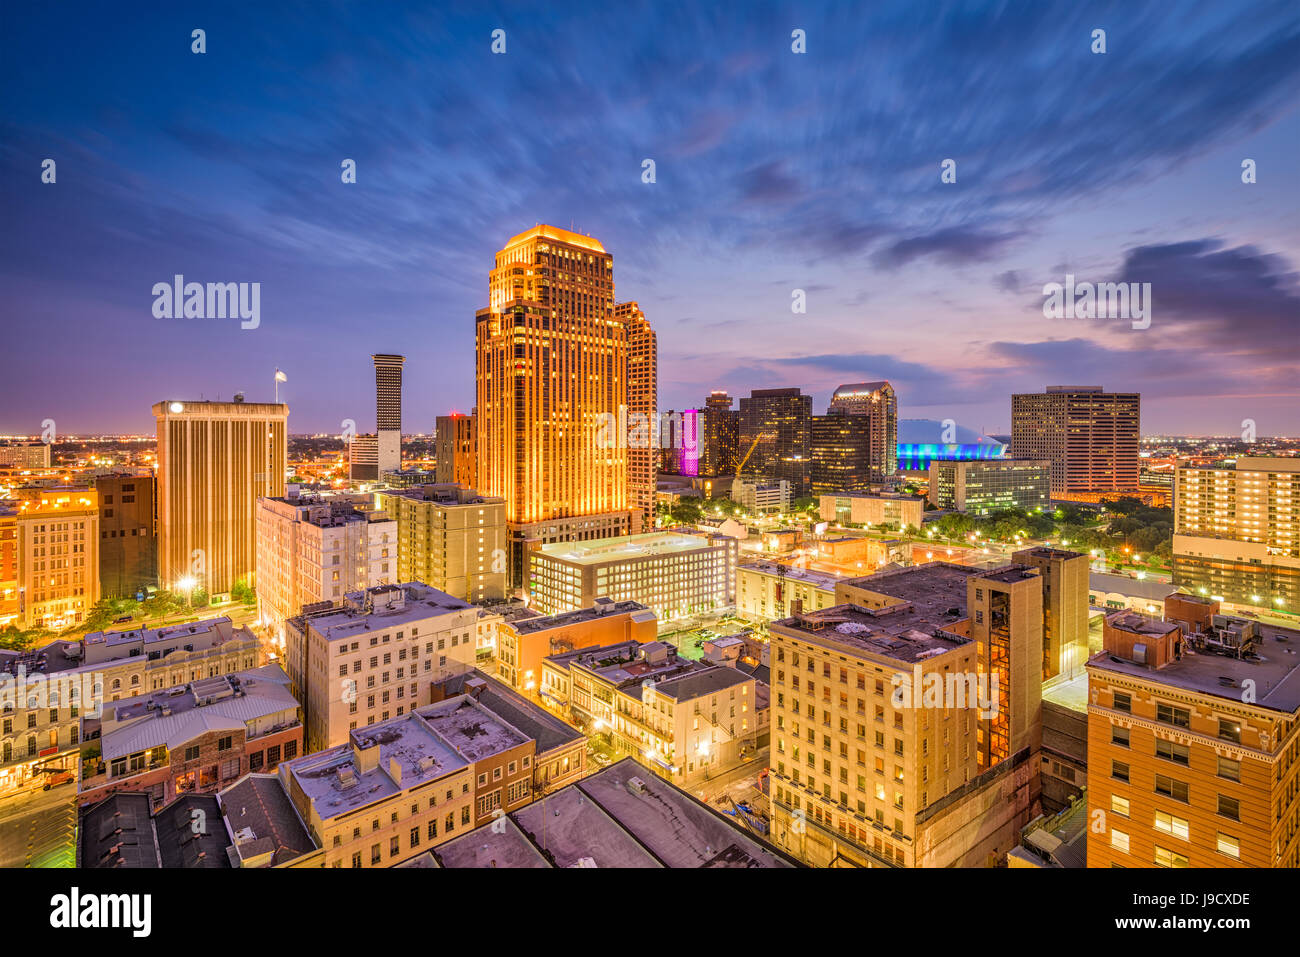 New Orleans, Louisiana, USA Central Business District skyline. Stock Photo